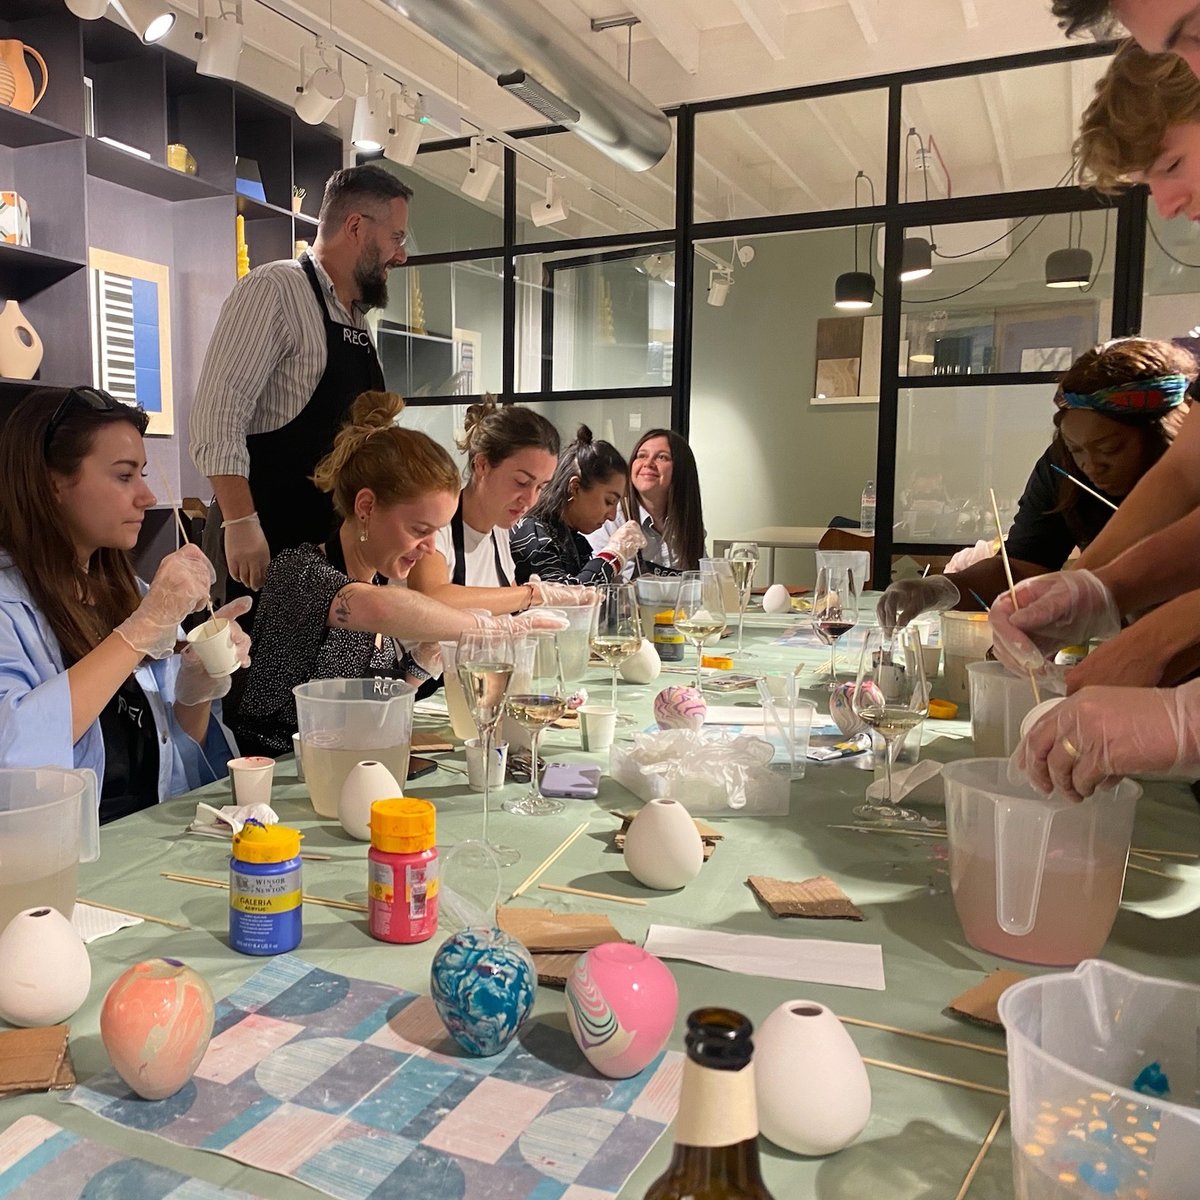 Another great event in the Domus Clerkenwell showroom centred on well-being and taking time to enjoy the moment—we hosted Anomaly, once again supported by Recess Living (Team Building Events + Workshops).